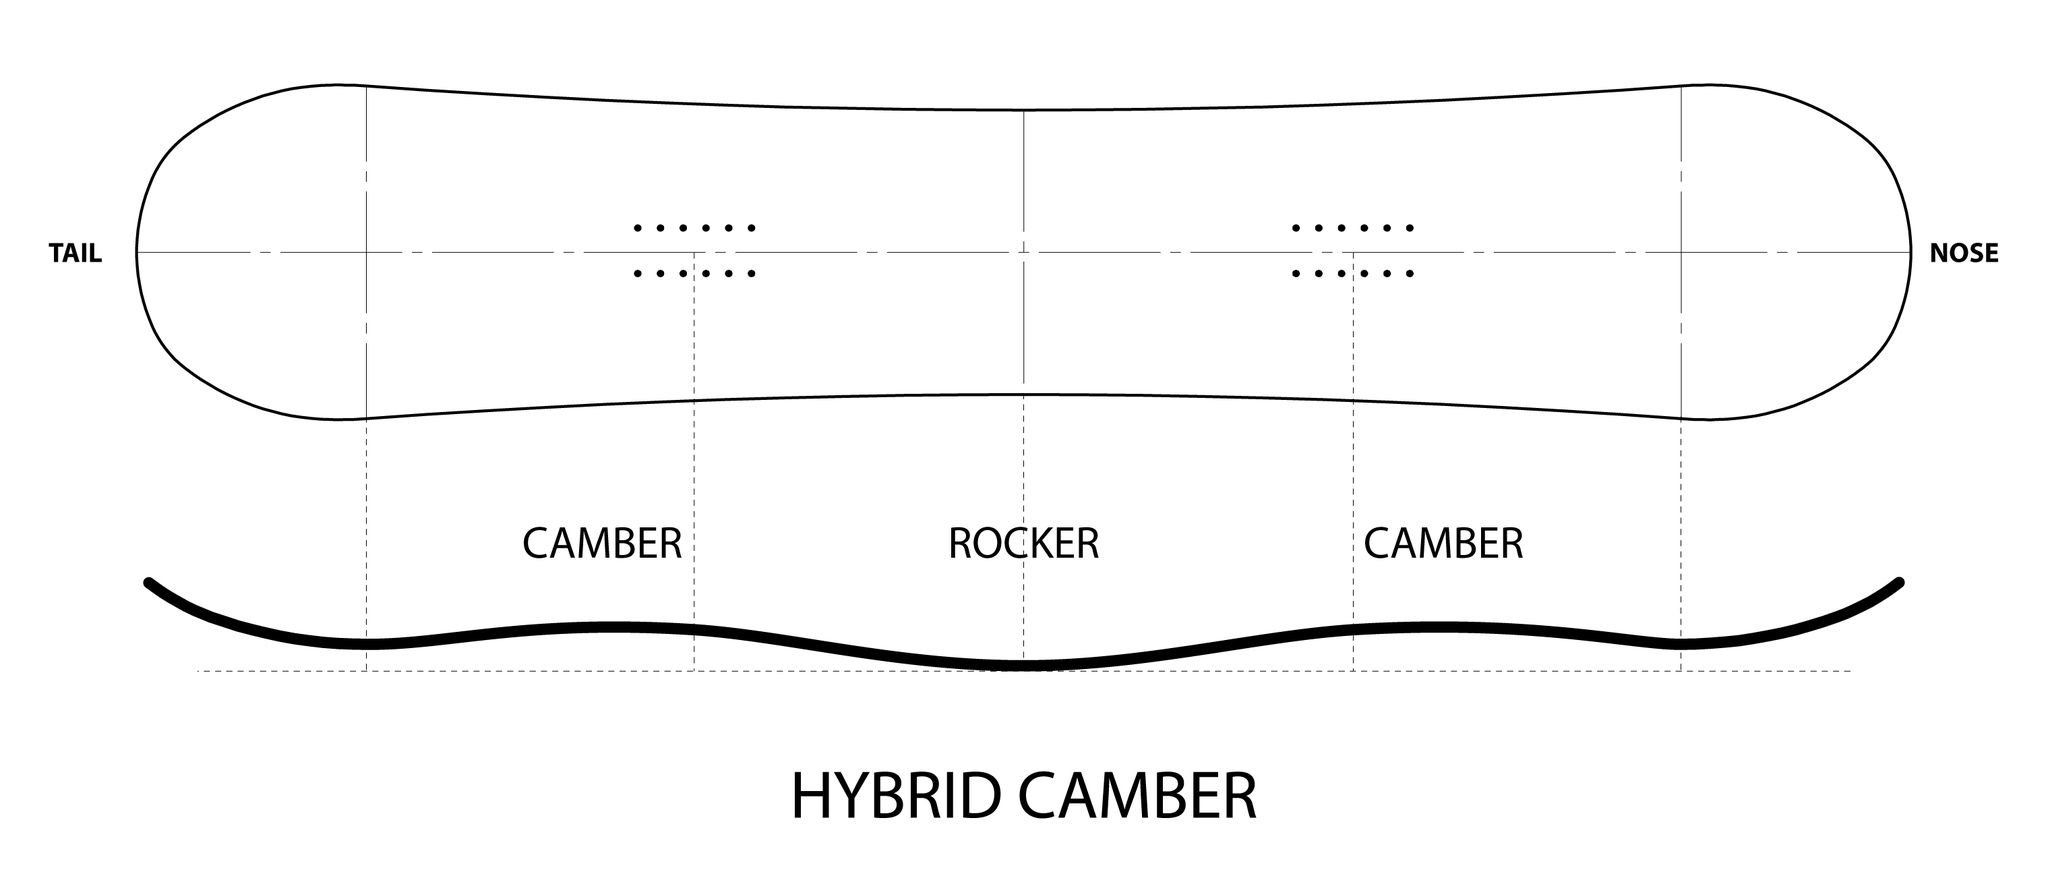 Hybrid Camber (Snowboard Profile) — Dictionary